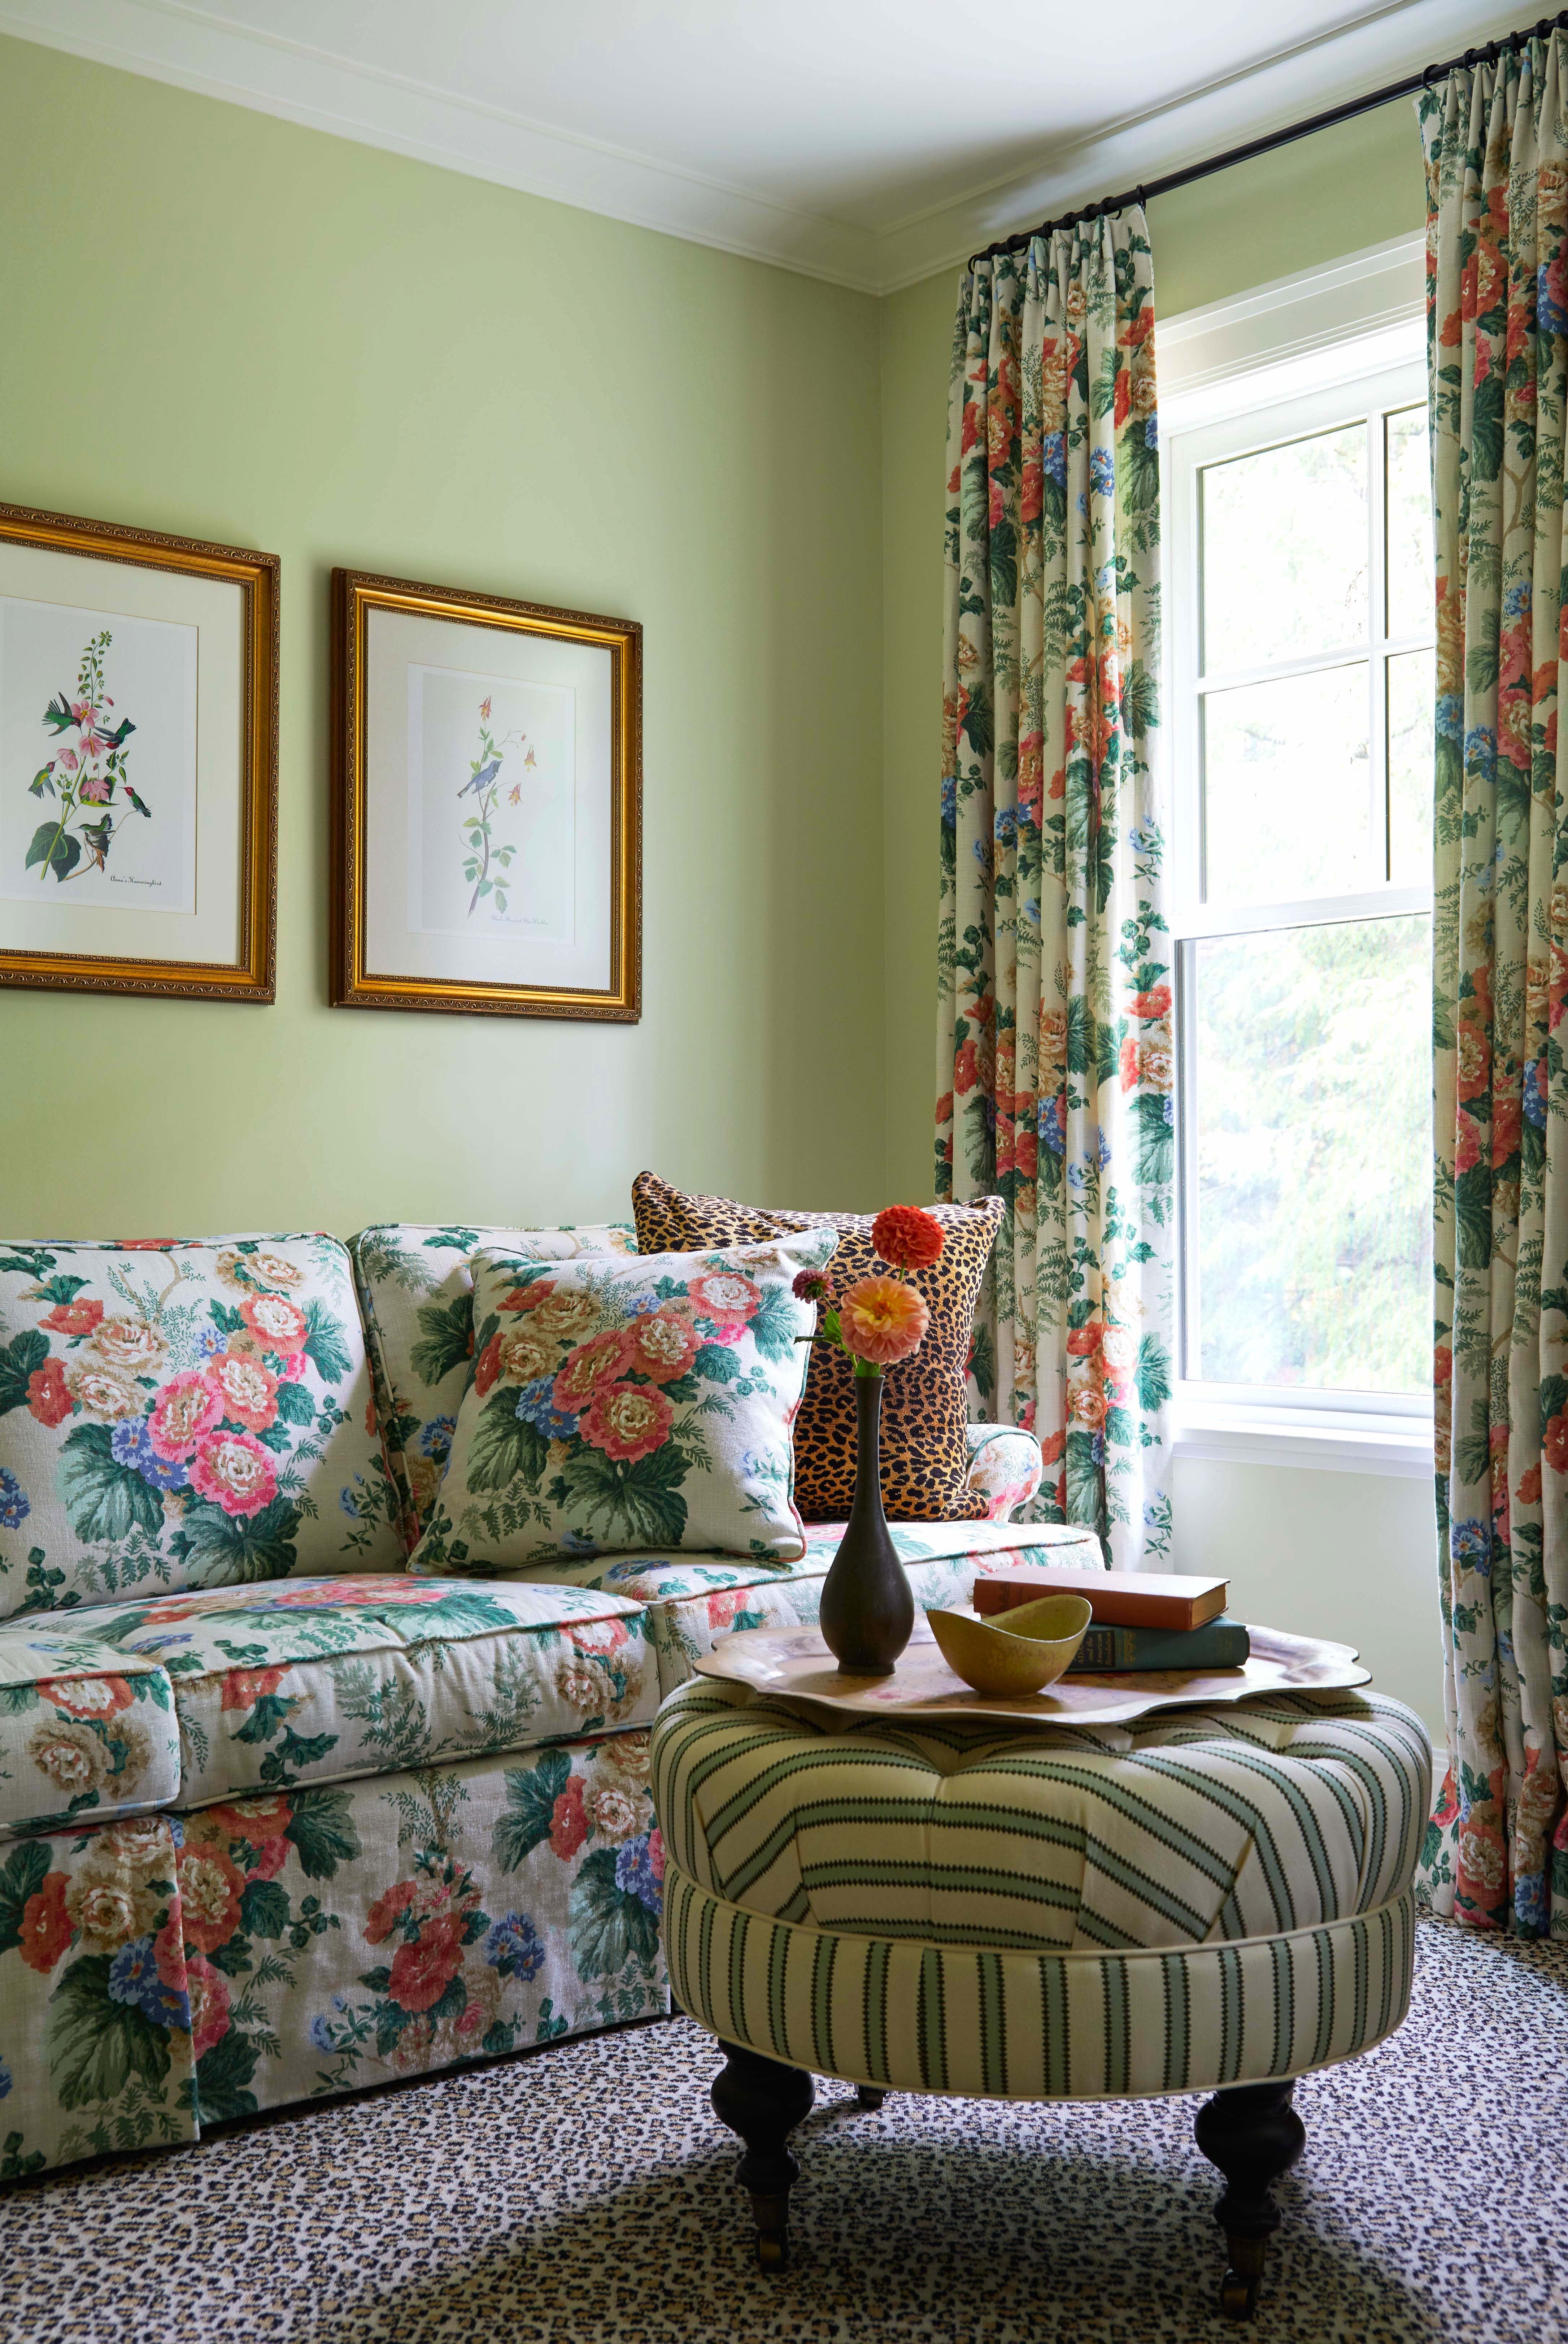 The Best Southern Decorating Tips of All Time